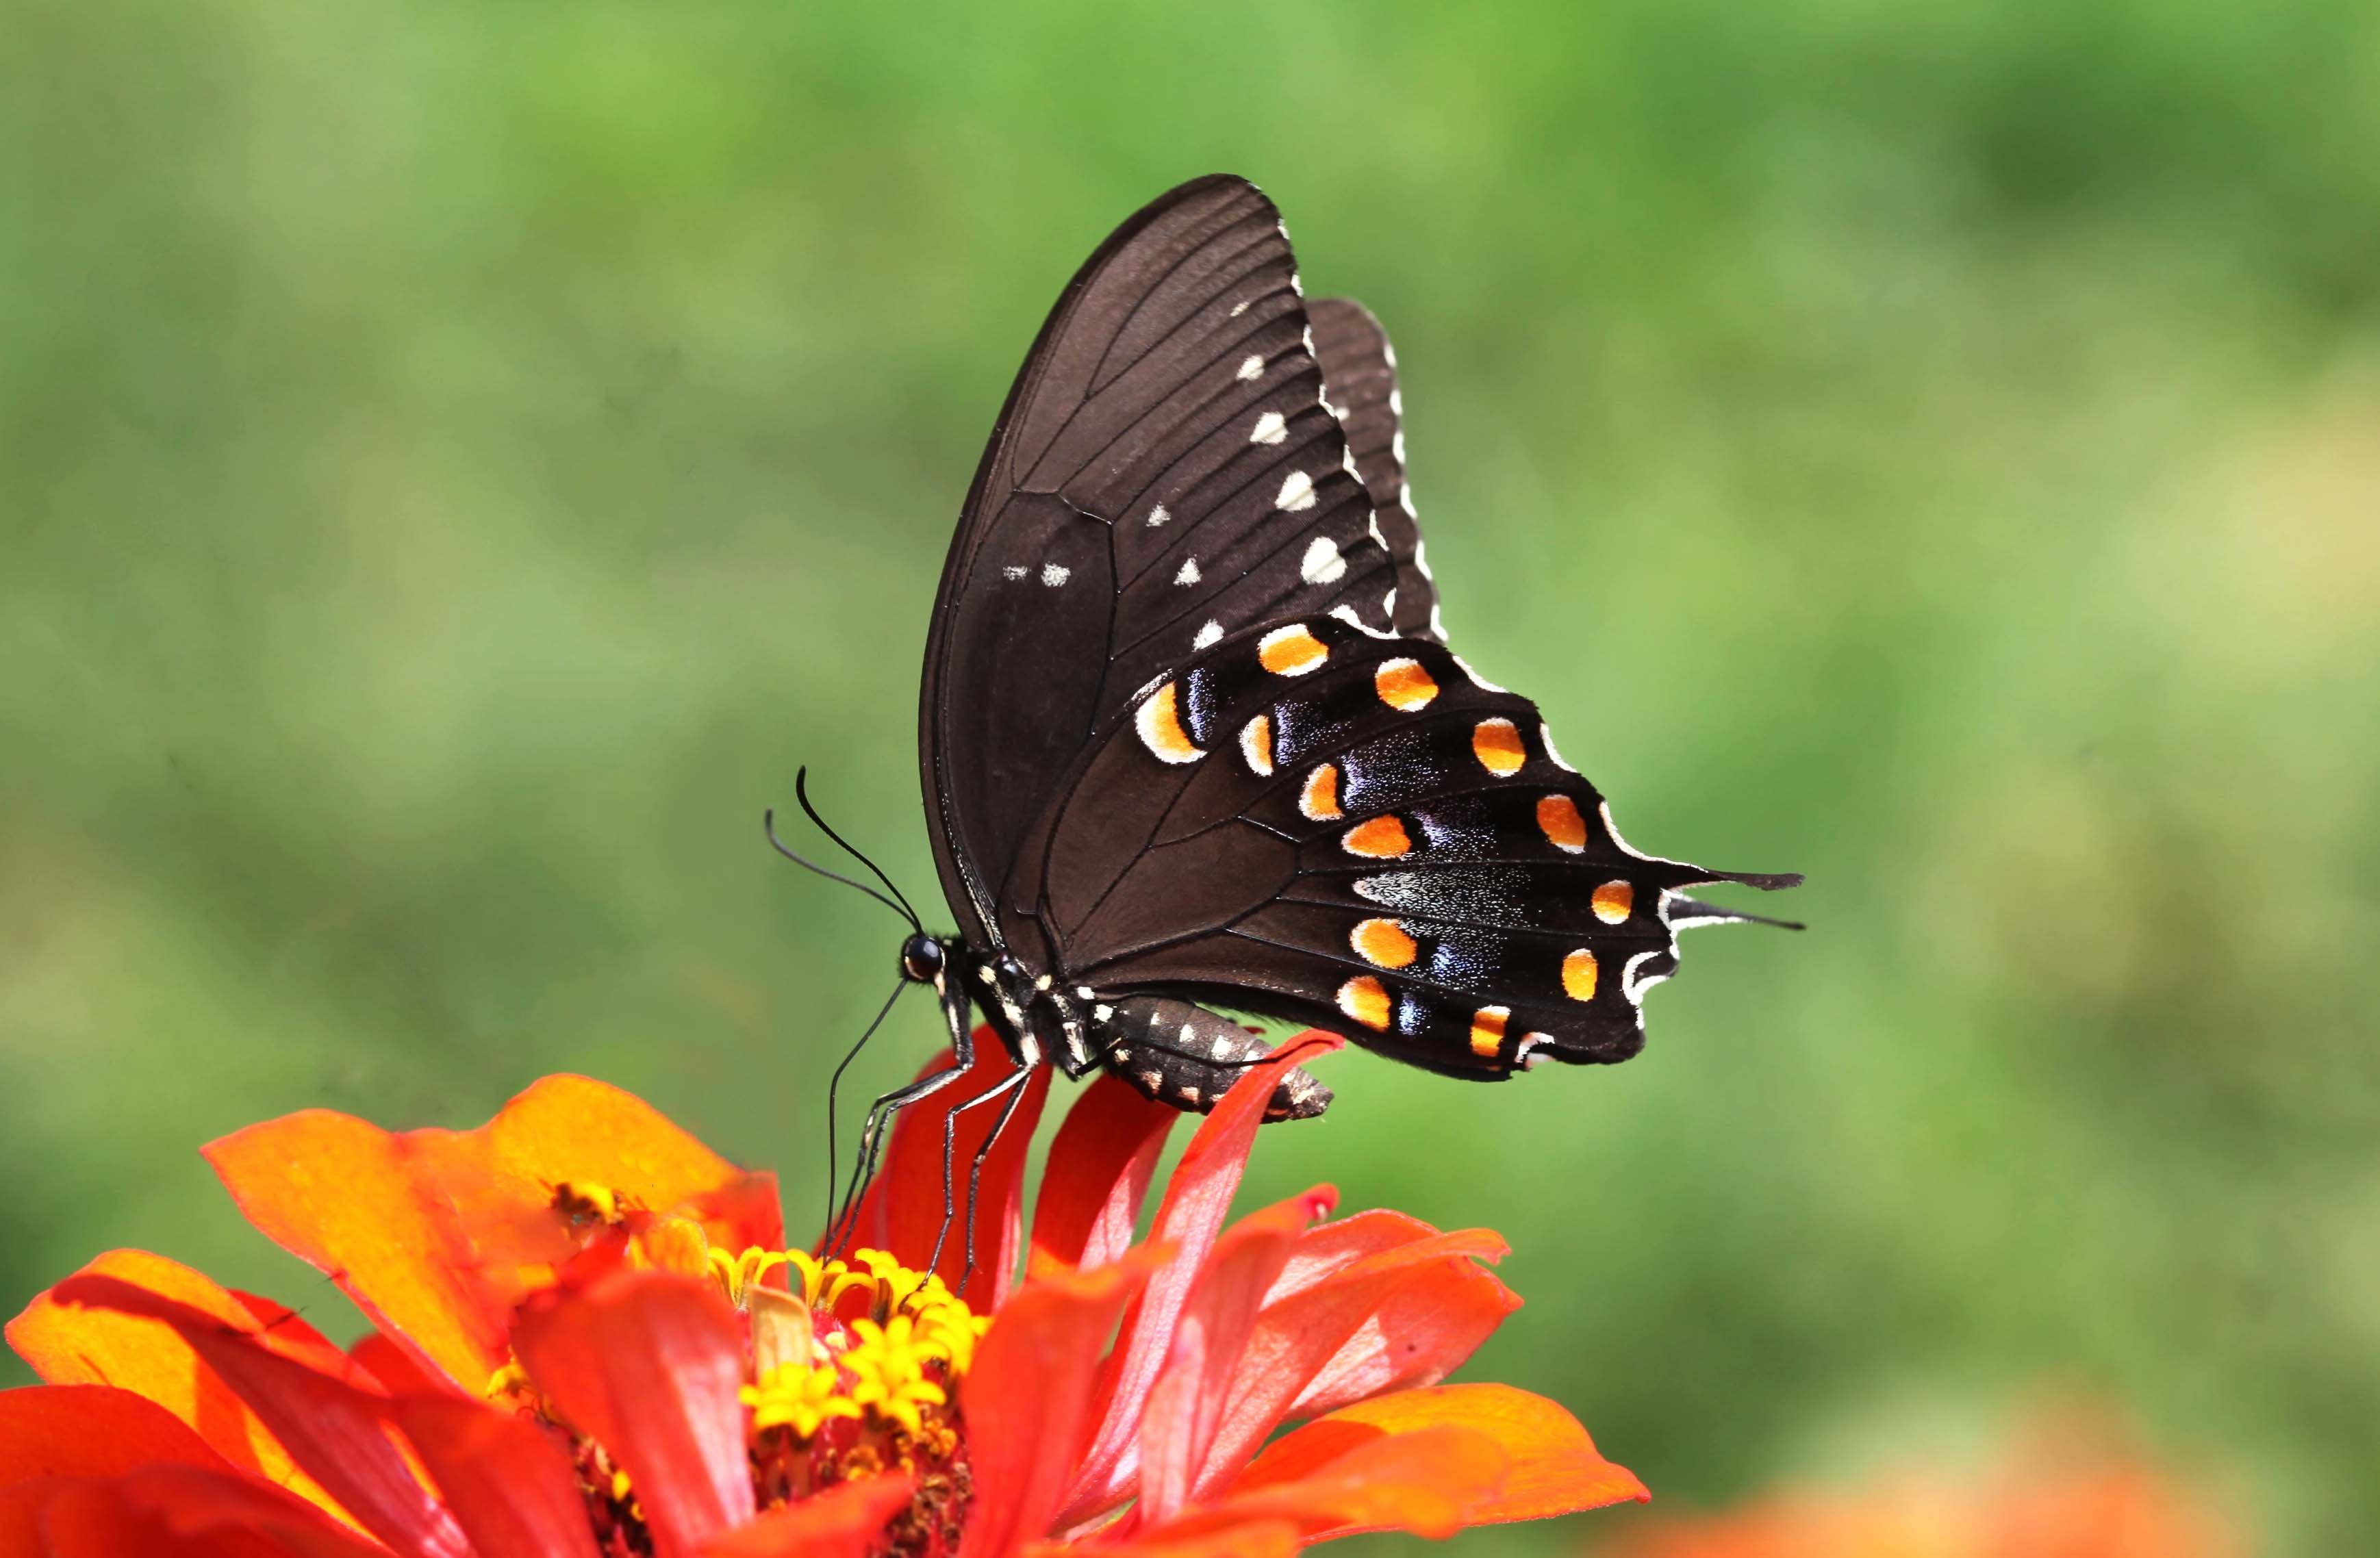 Black And Yellow Swallowtail Butterfly On Orange Petaled Flowers